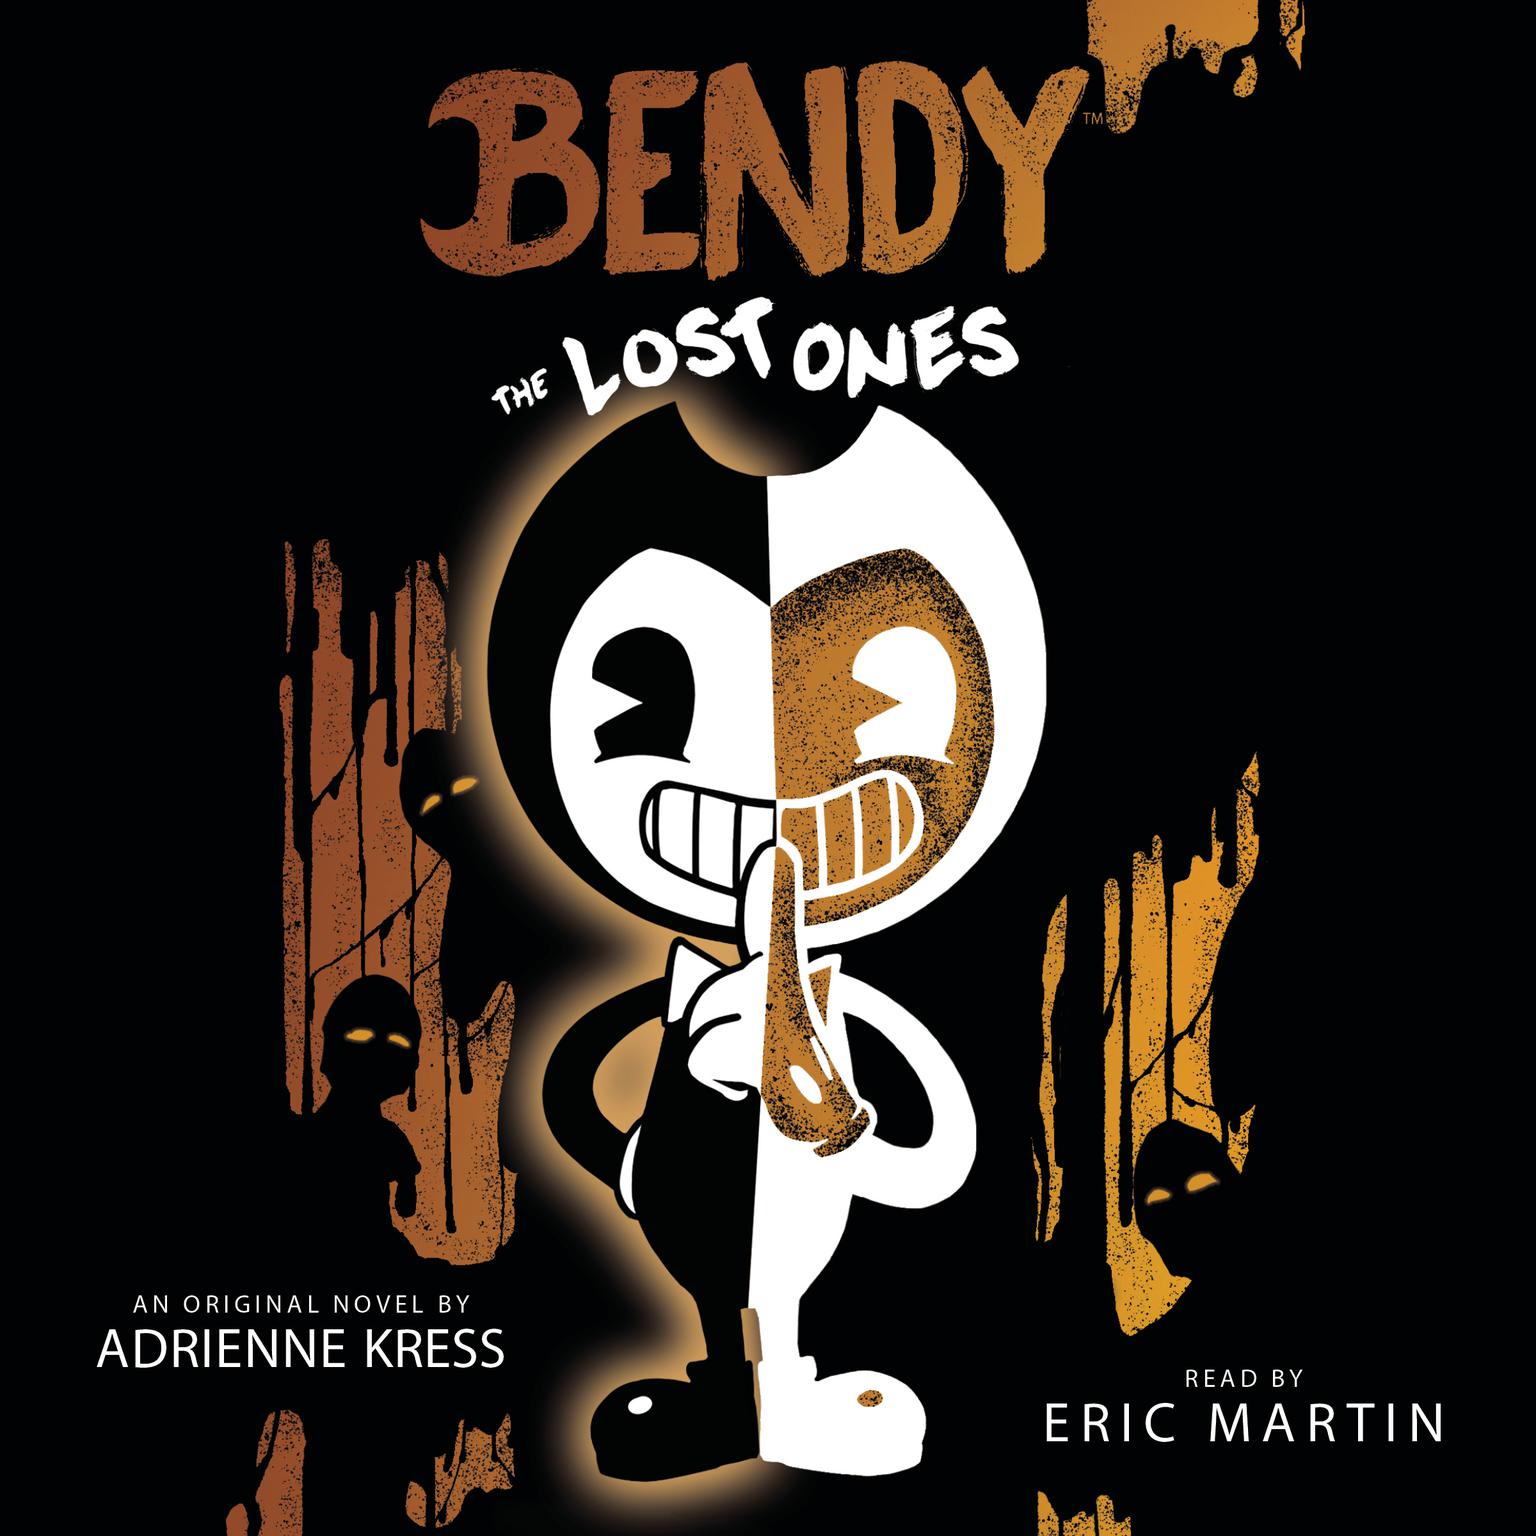 The Lost Ones: An AFK Novel (Bendy #2) Audiobook, by Adrienne Kress